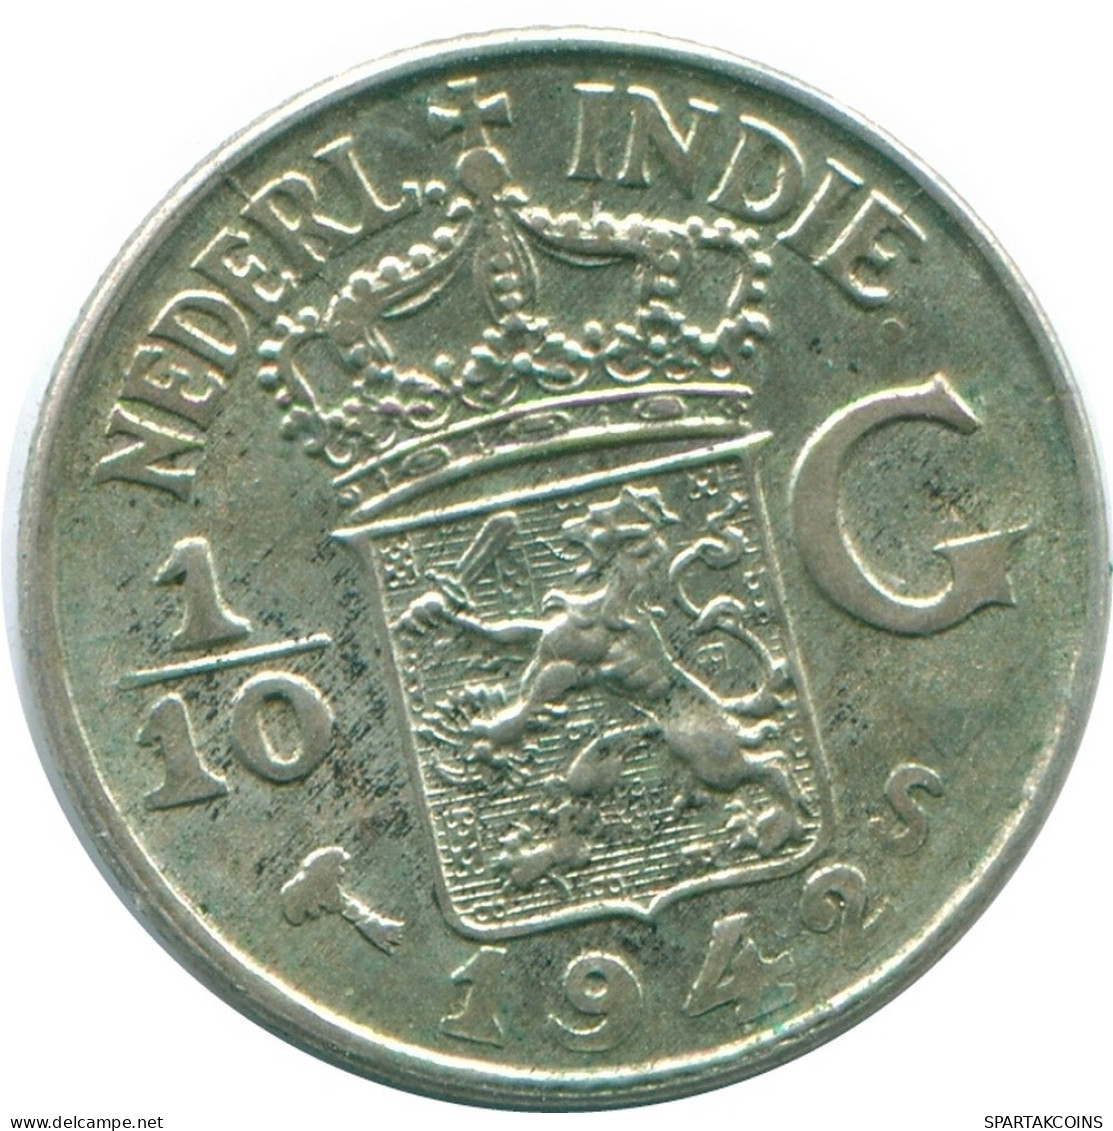 1/10 GULDEN 1942 NETHERLANDS EAST INDIES SILVER Colonial Coin #NL13870.3.U.A - Indes Neerlandesas